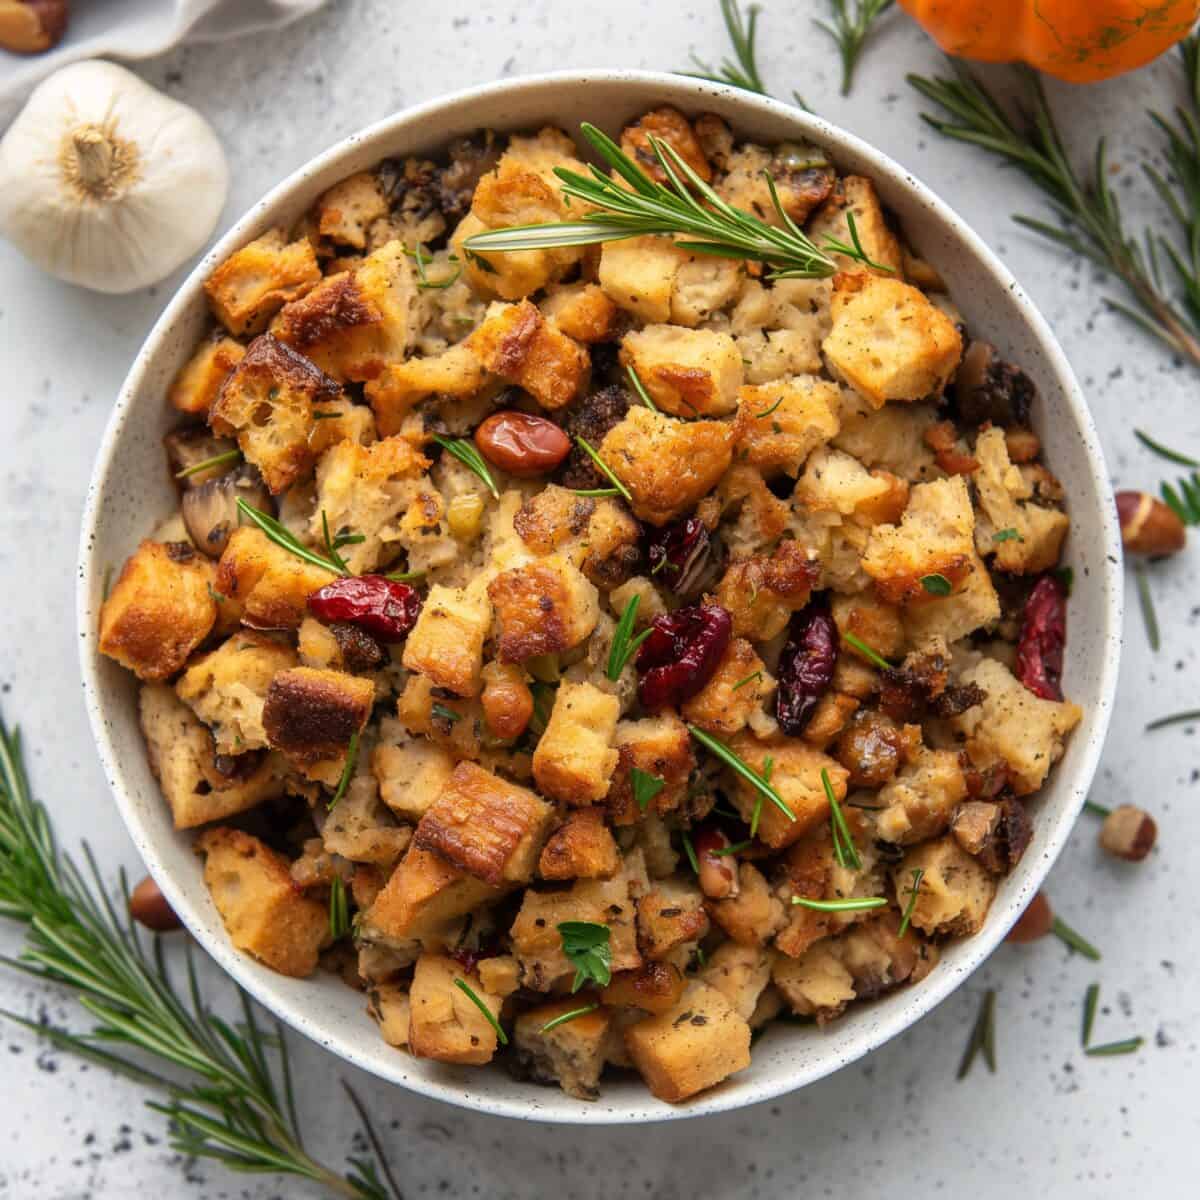 Top 15 Most Flavorful Thanksgiving Stuffing Recipes - BeCentsational